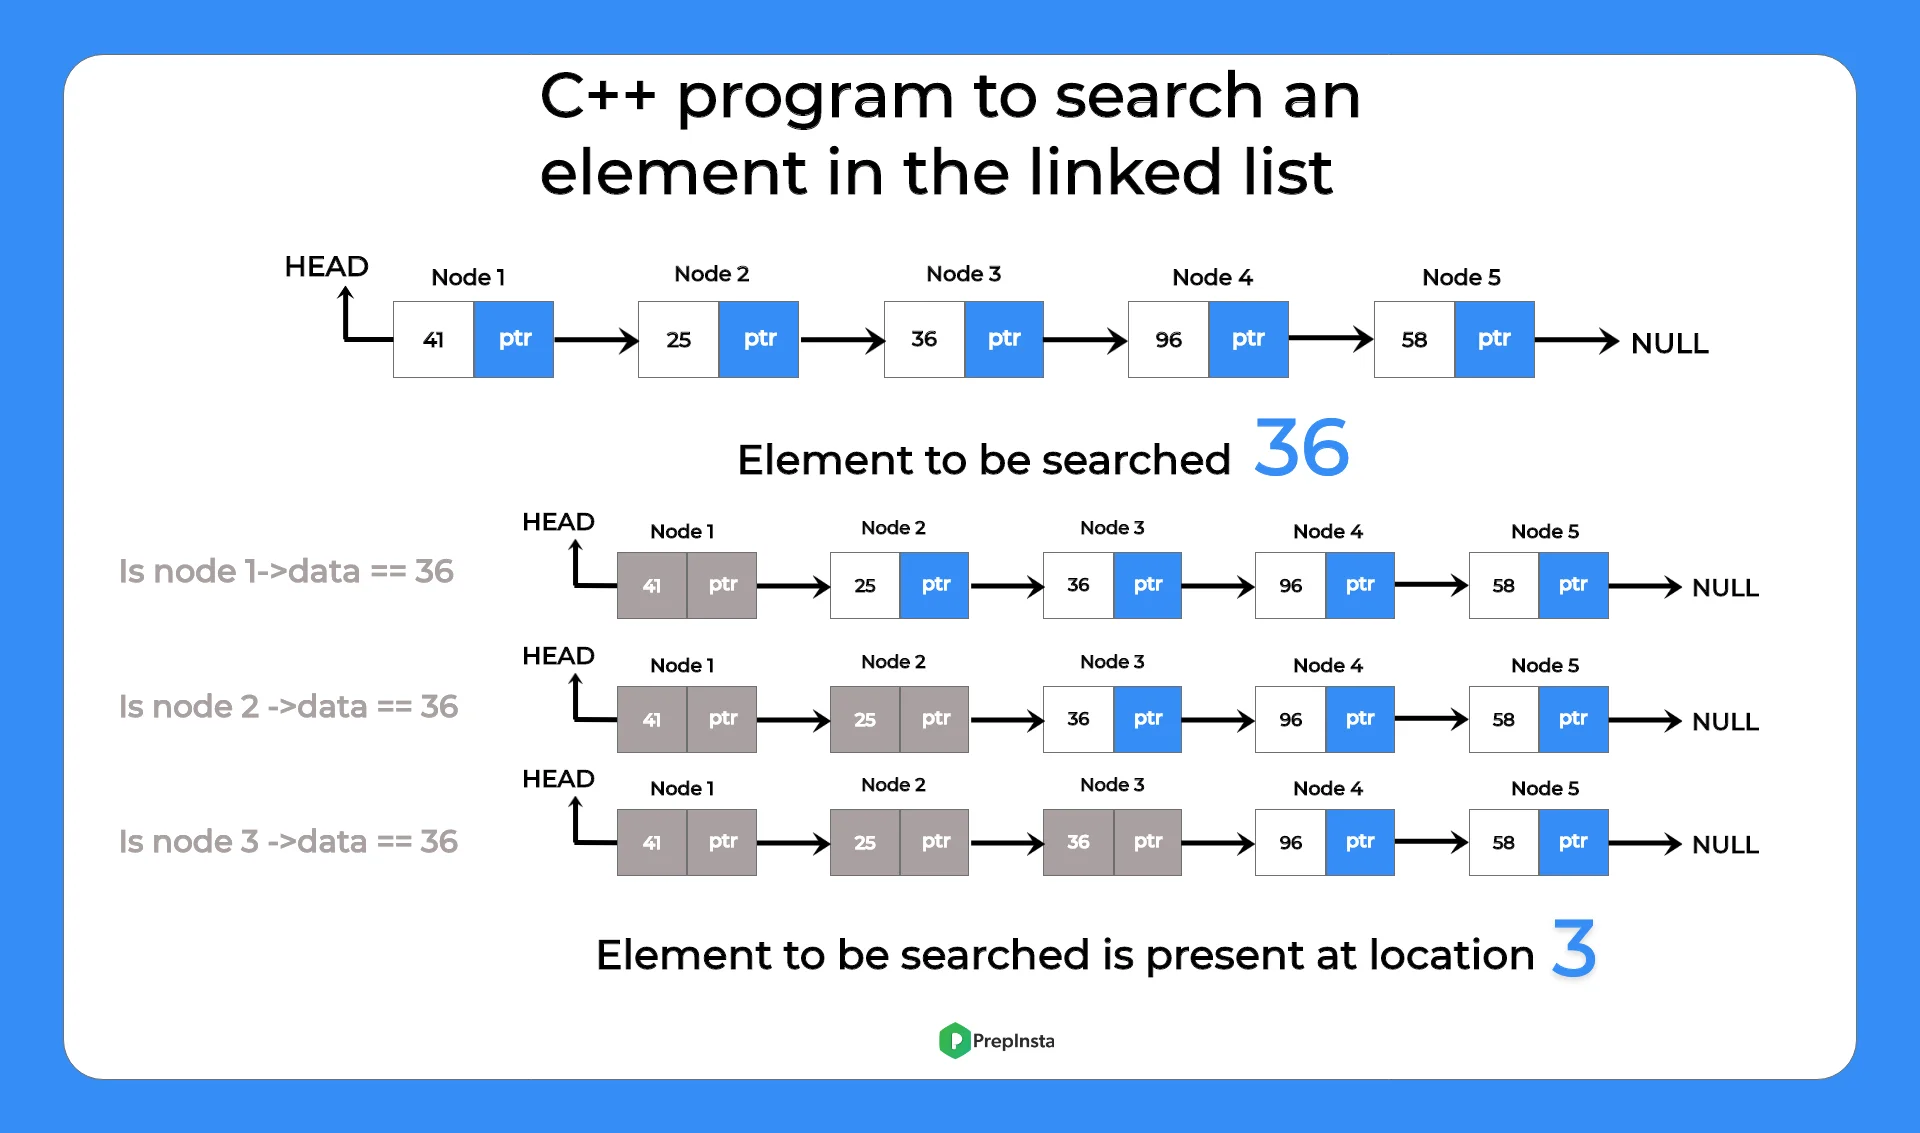 C++ program to search an element in the linked list